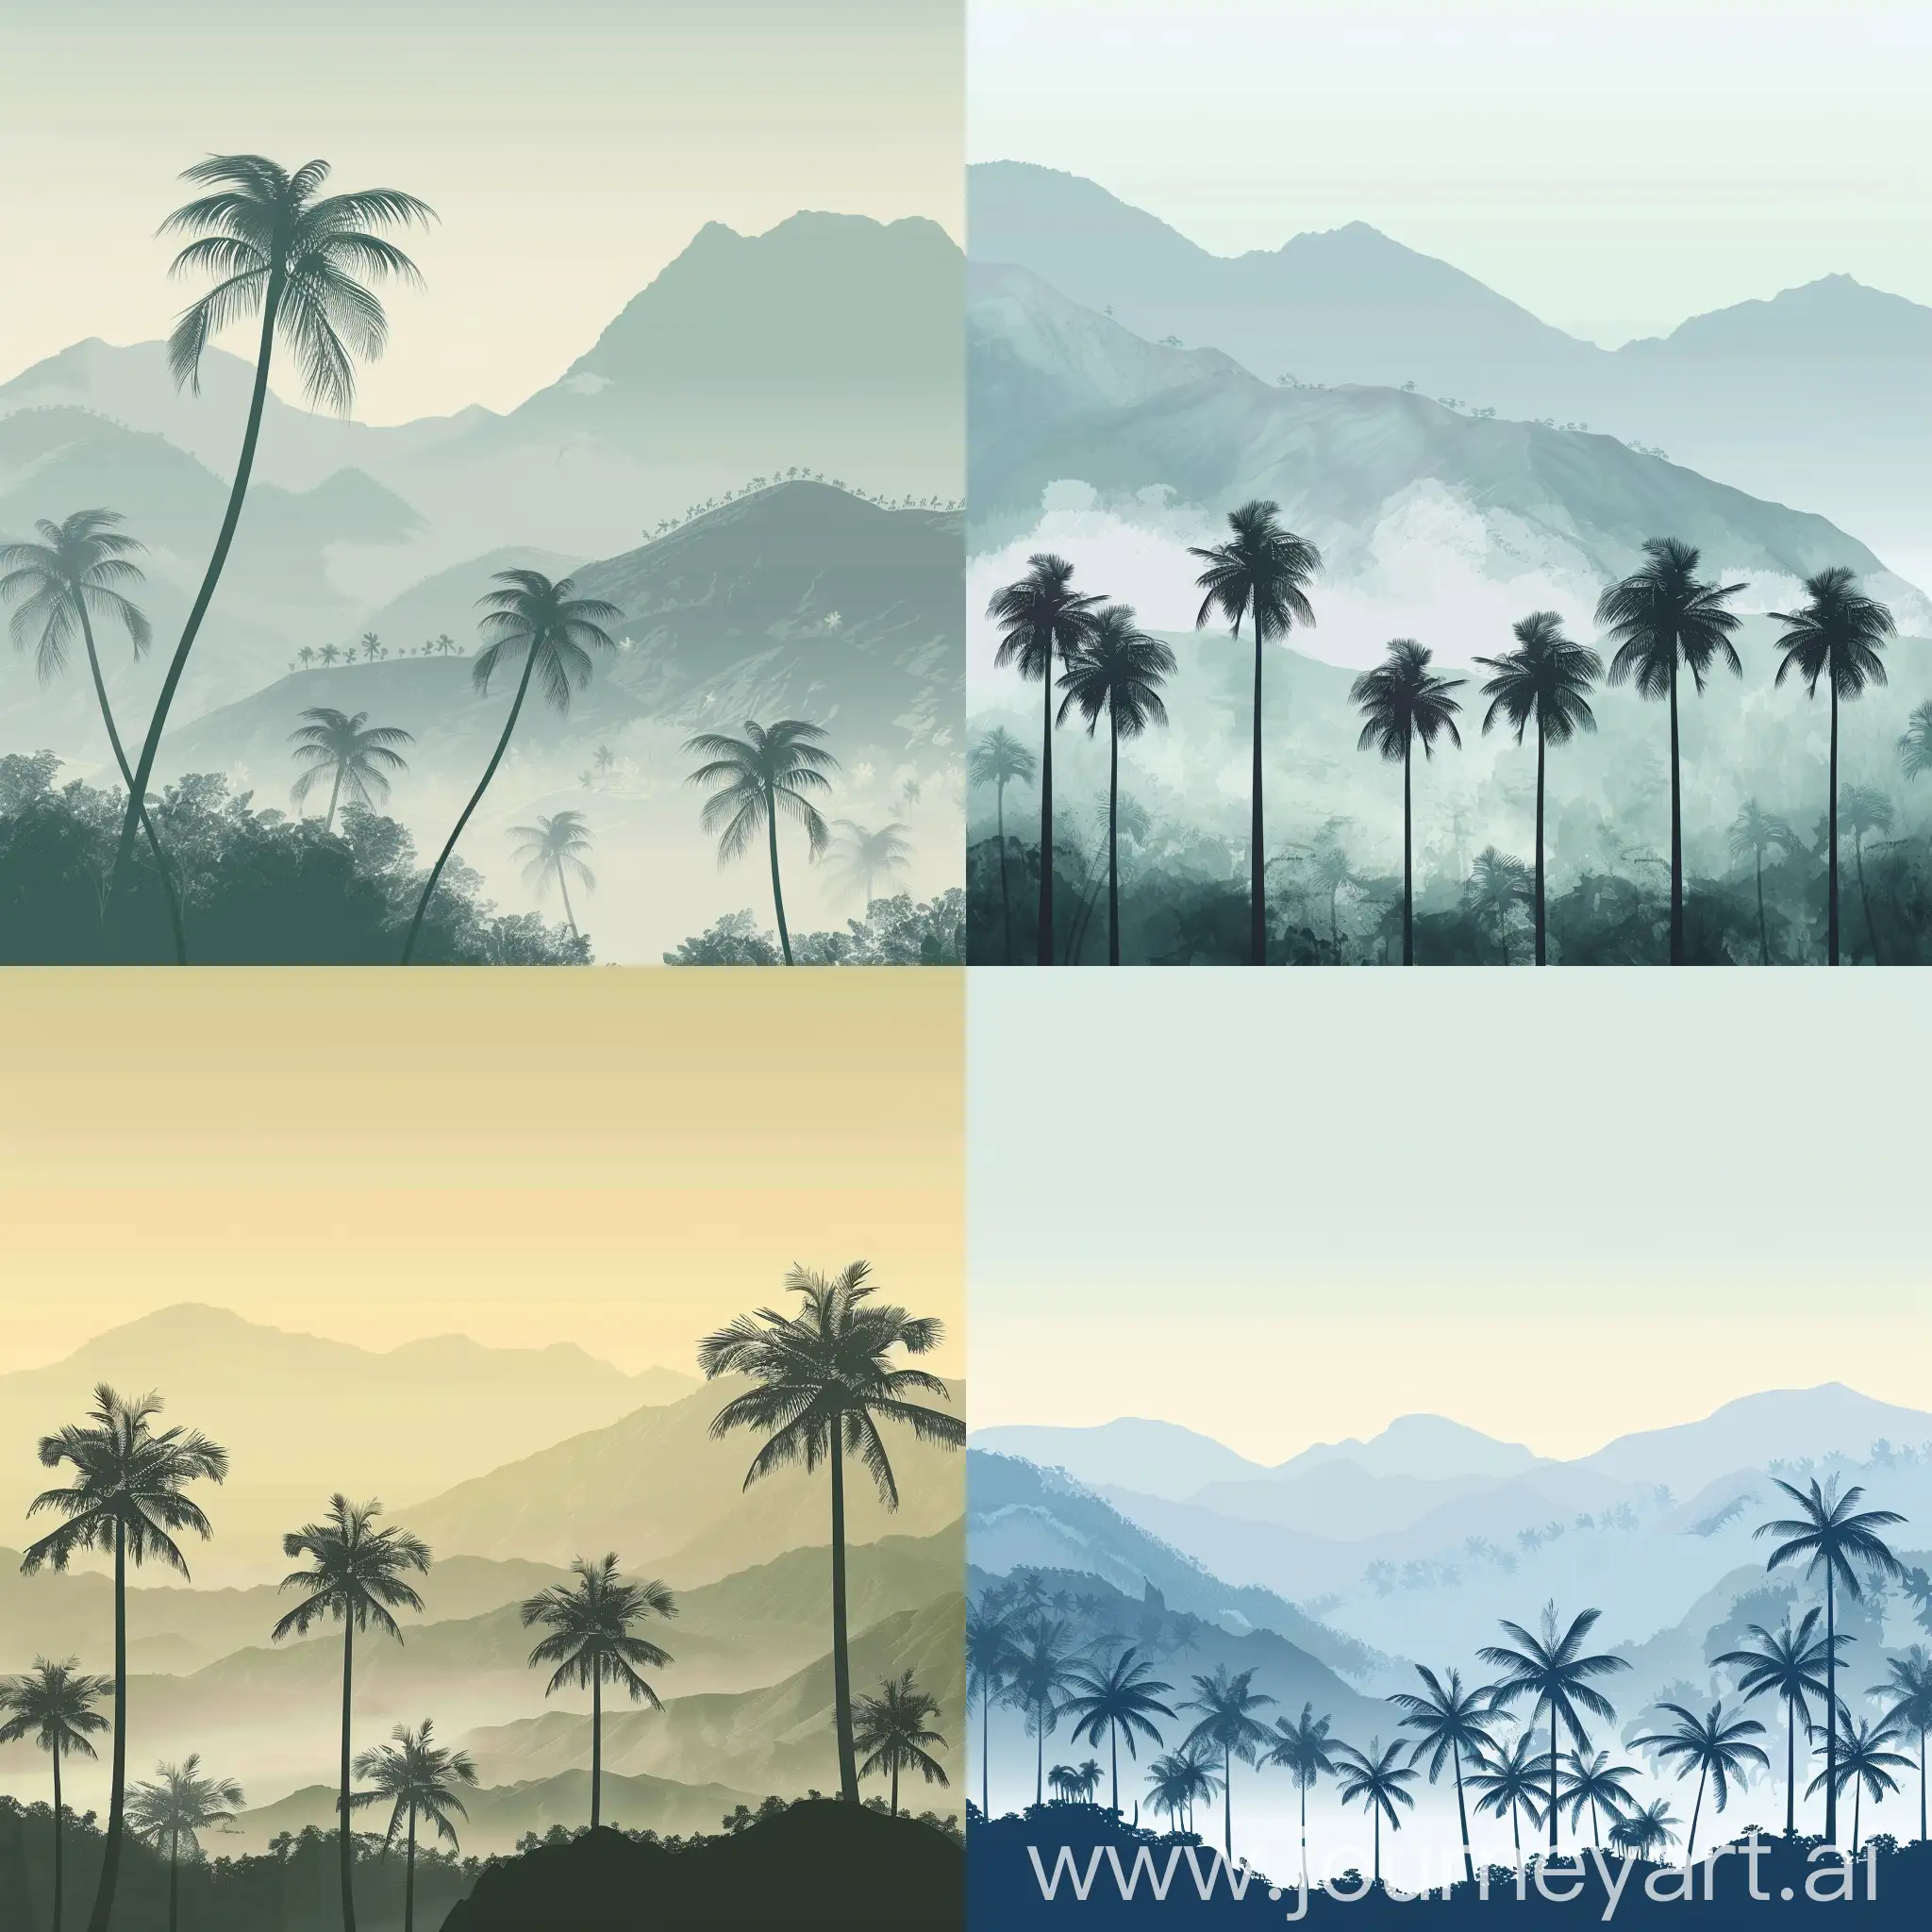 Background for website pale images of palm trees and mountains
